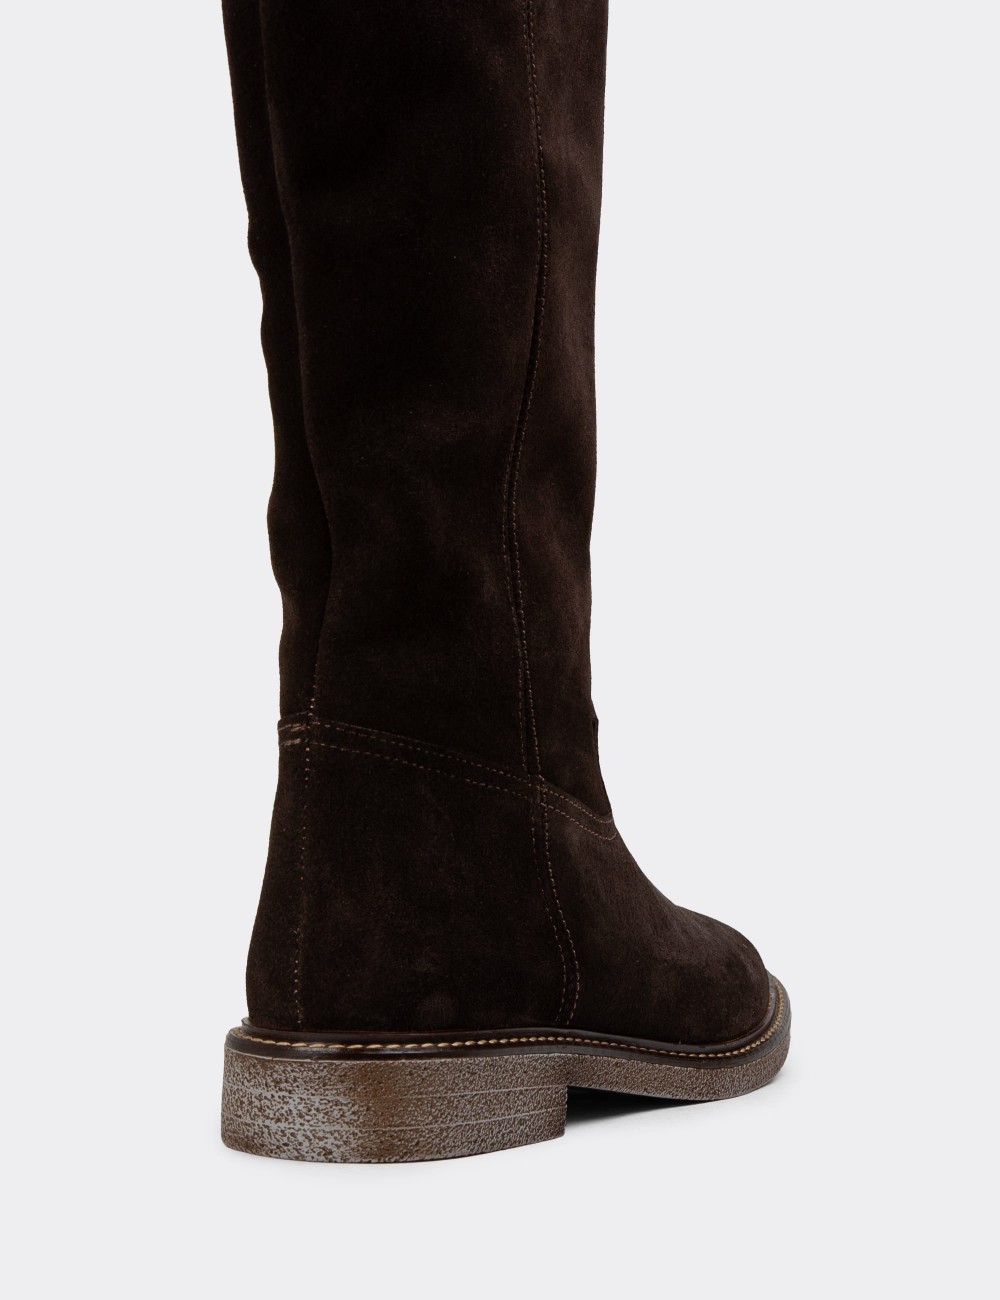 Brown Suede Leather Boots - 01968ZKHVC01